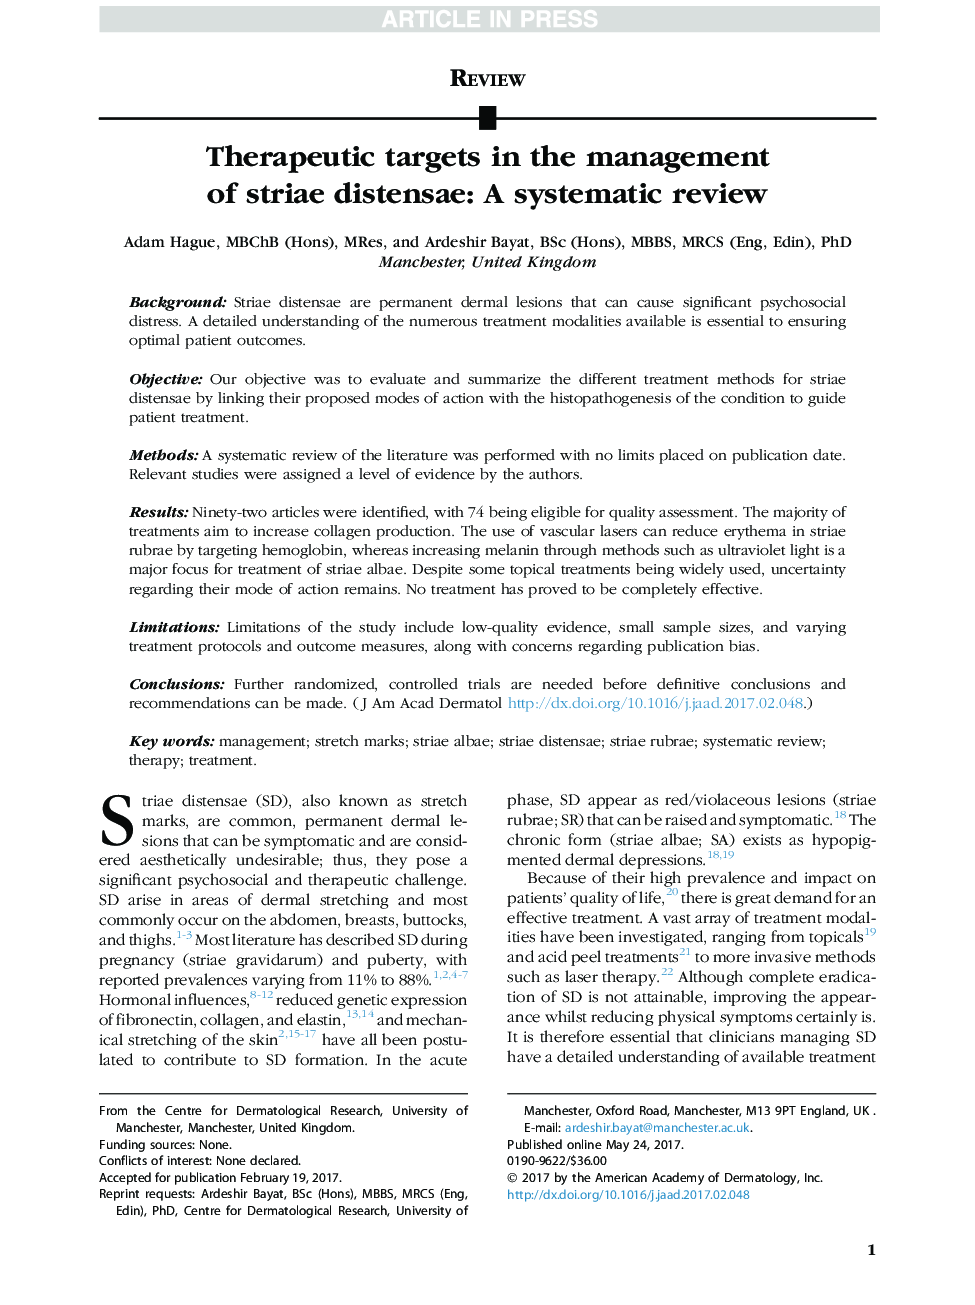 Therapeutic targets in the management of striae distensae: A systematic review